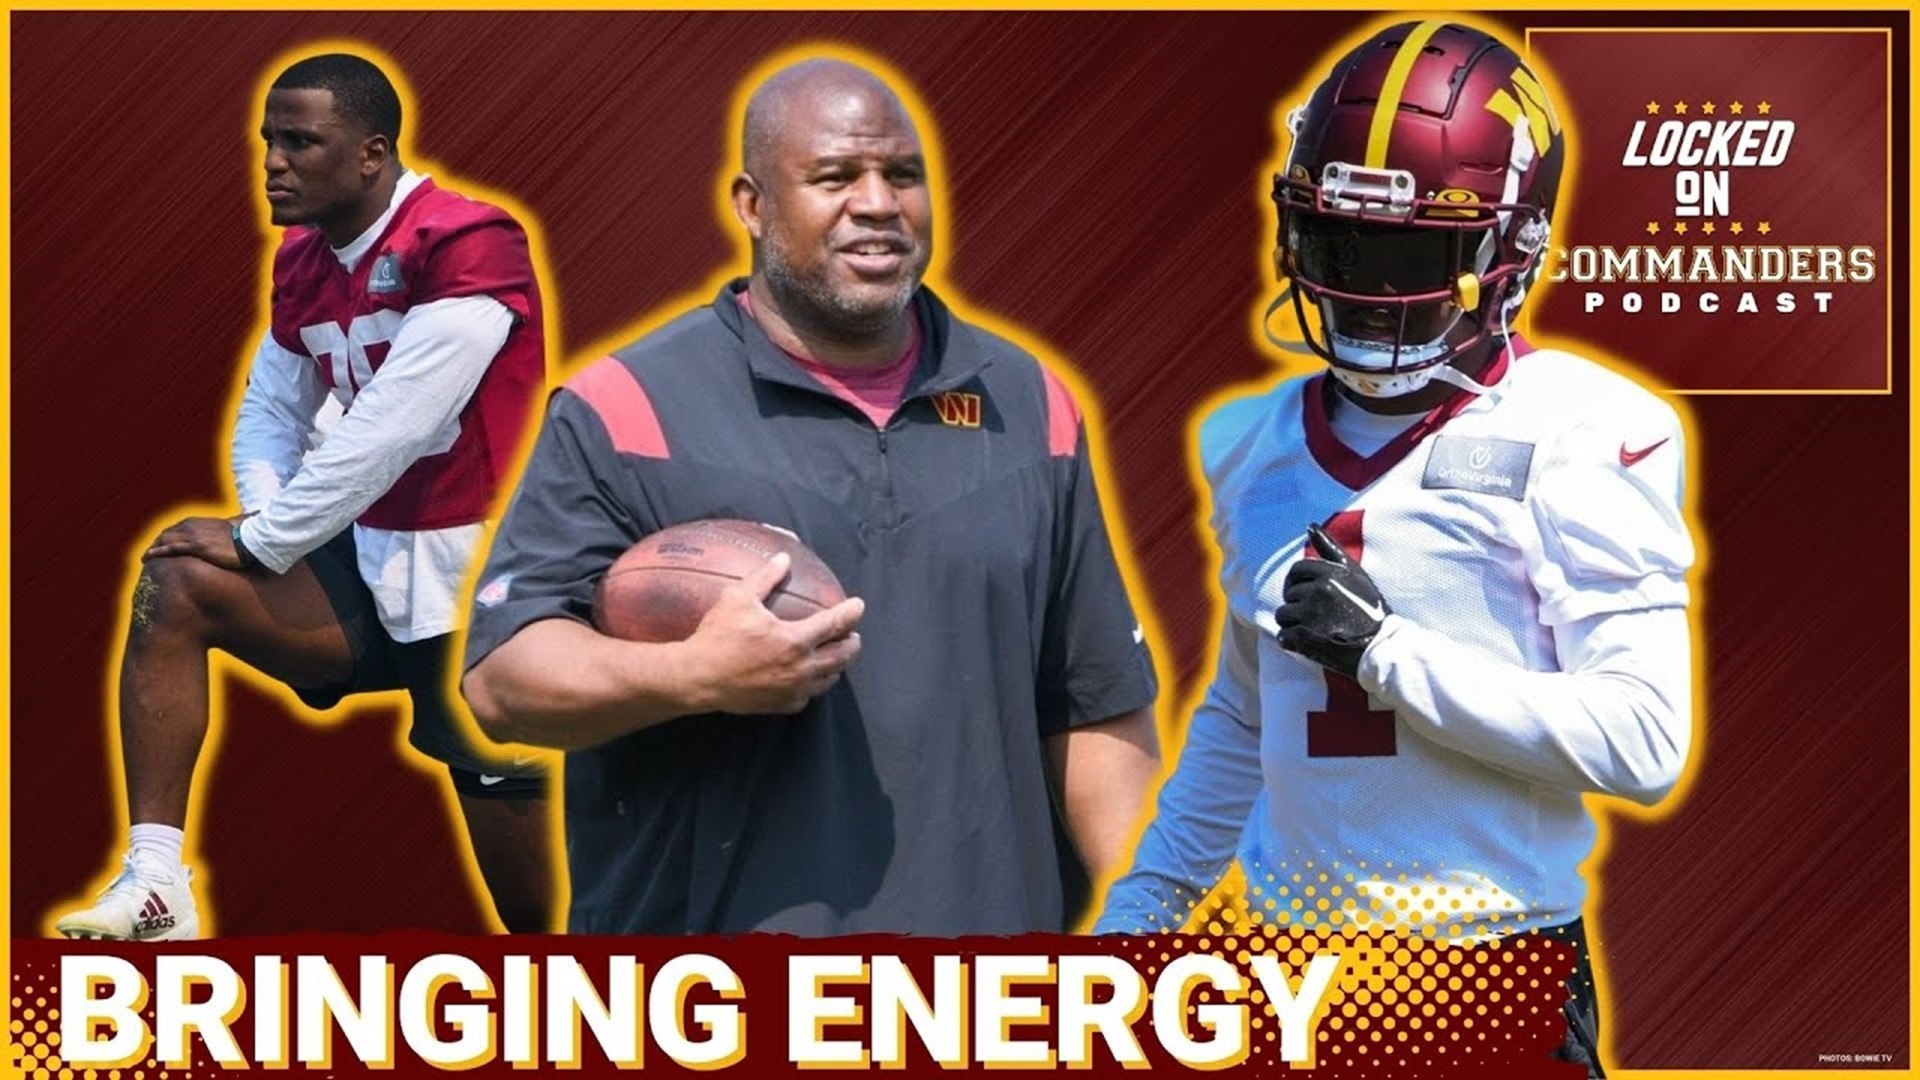 Washington Commanders minicamp Day 2 ends with assistant head coach and offensive coordinator Eric Bieniemy, Jahan Dotson, and Jeremy Reaves bringing energy.